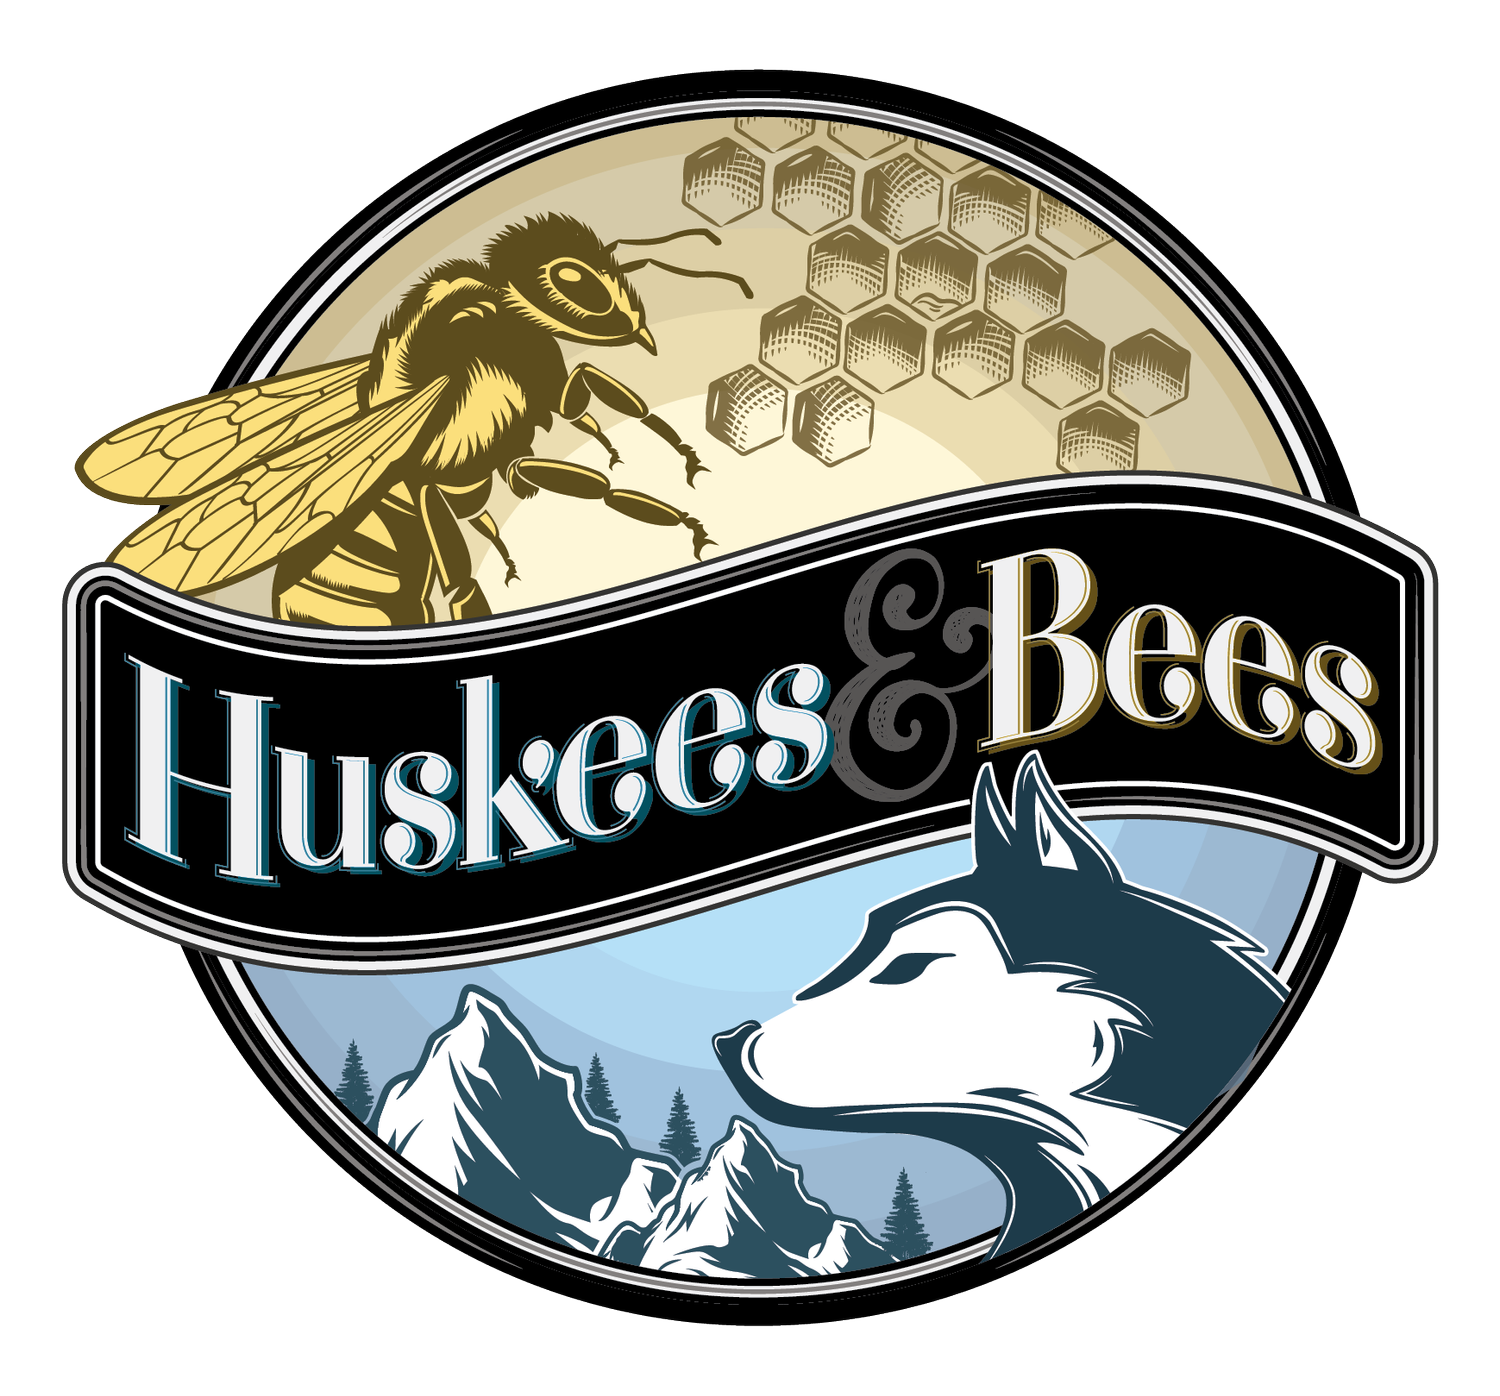 Huskees &amp; Bees